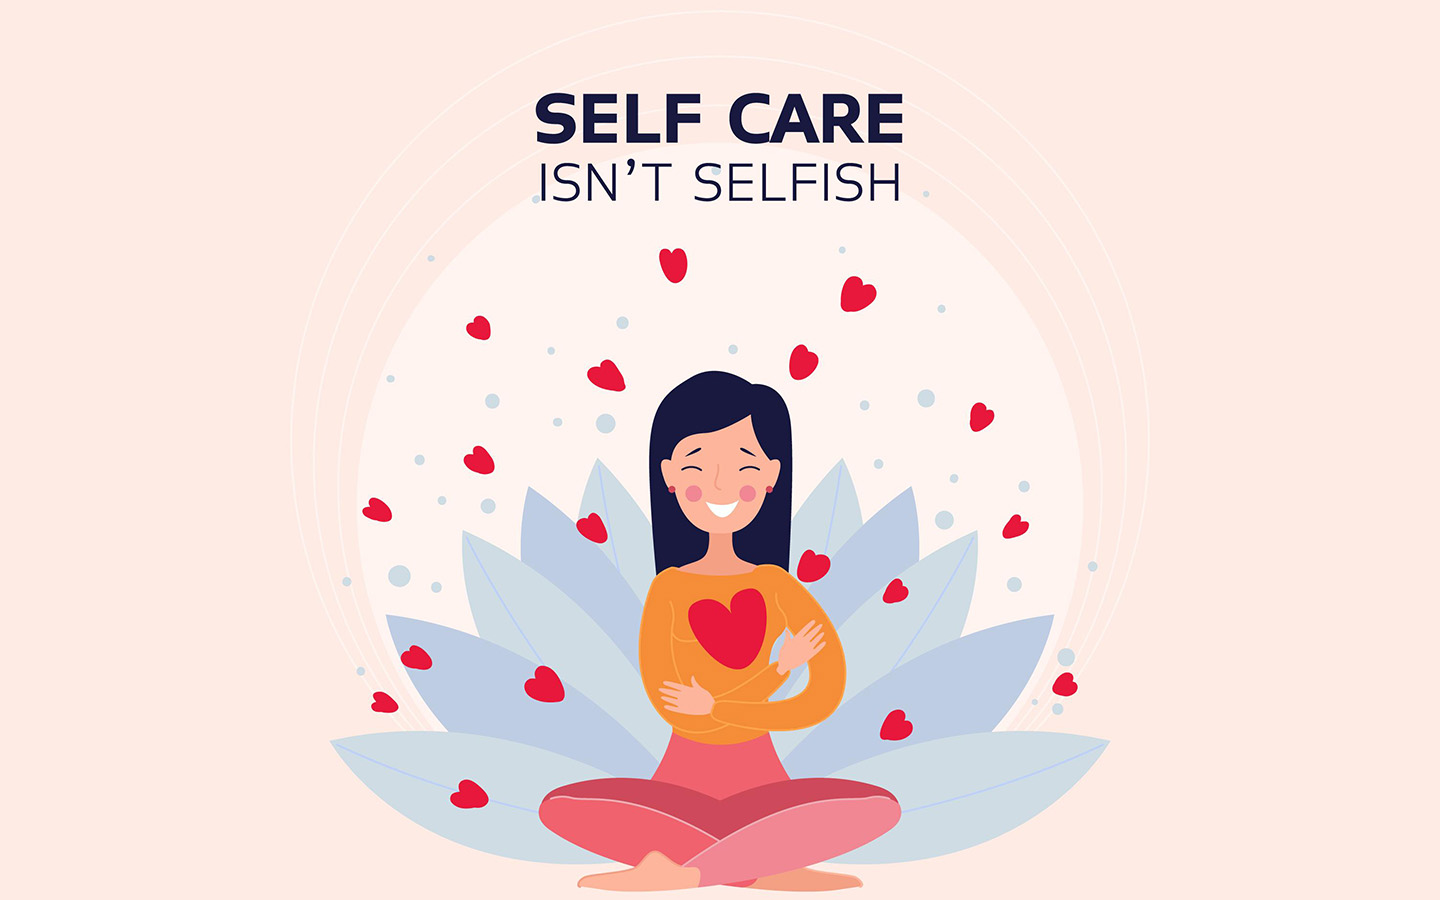 Understanding self-care and taking a stand for yourself